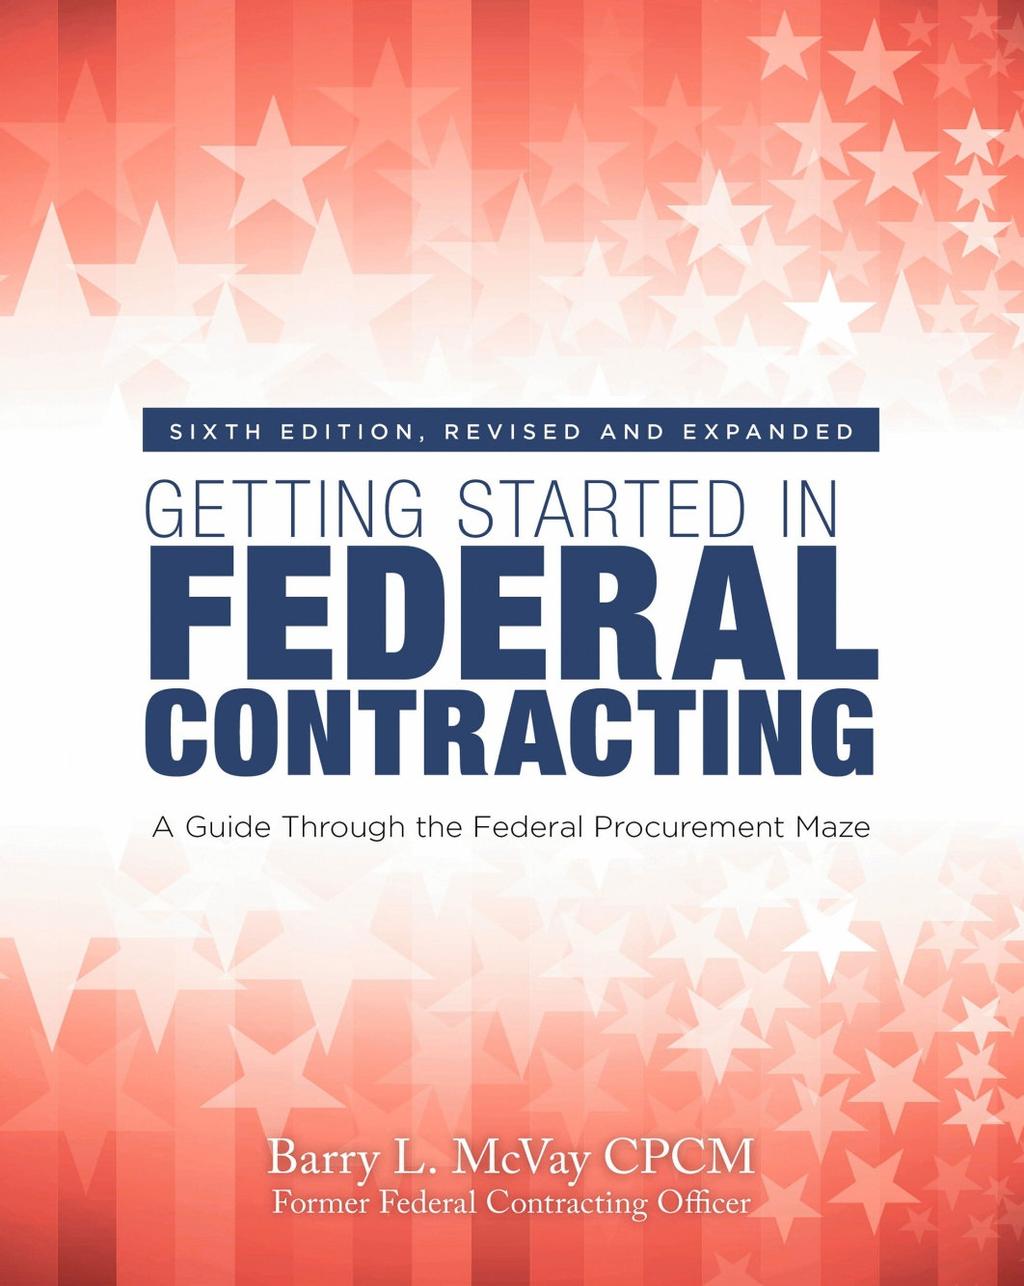 NEW FOR 2017! REVISED AND EXPANDED! 488 pages, 2017, ISBN: 978-0-912481-27-2, $49.95 from Panoptic Enterprises (http://www.fedgovcontracts.com) and from Amazon.